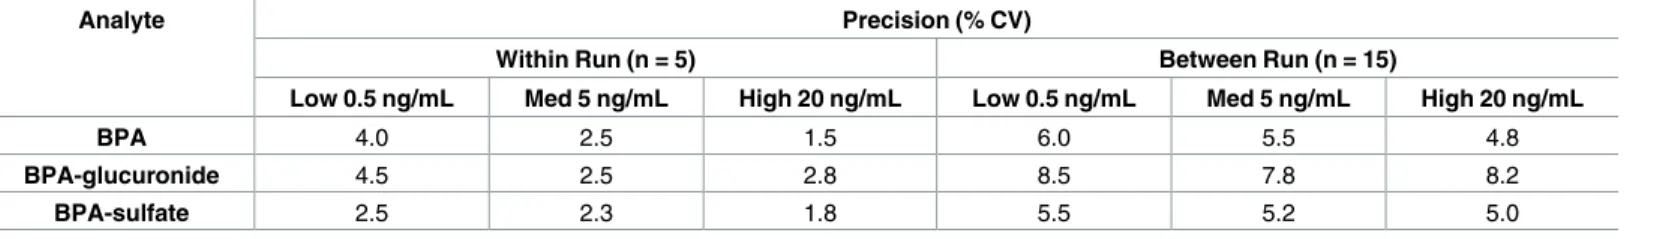 Table 1. Validated method precision established for the direct analysis of BPA and its primary metabolic conjugates in amniotic fluid using LC-MS/MS.